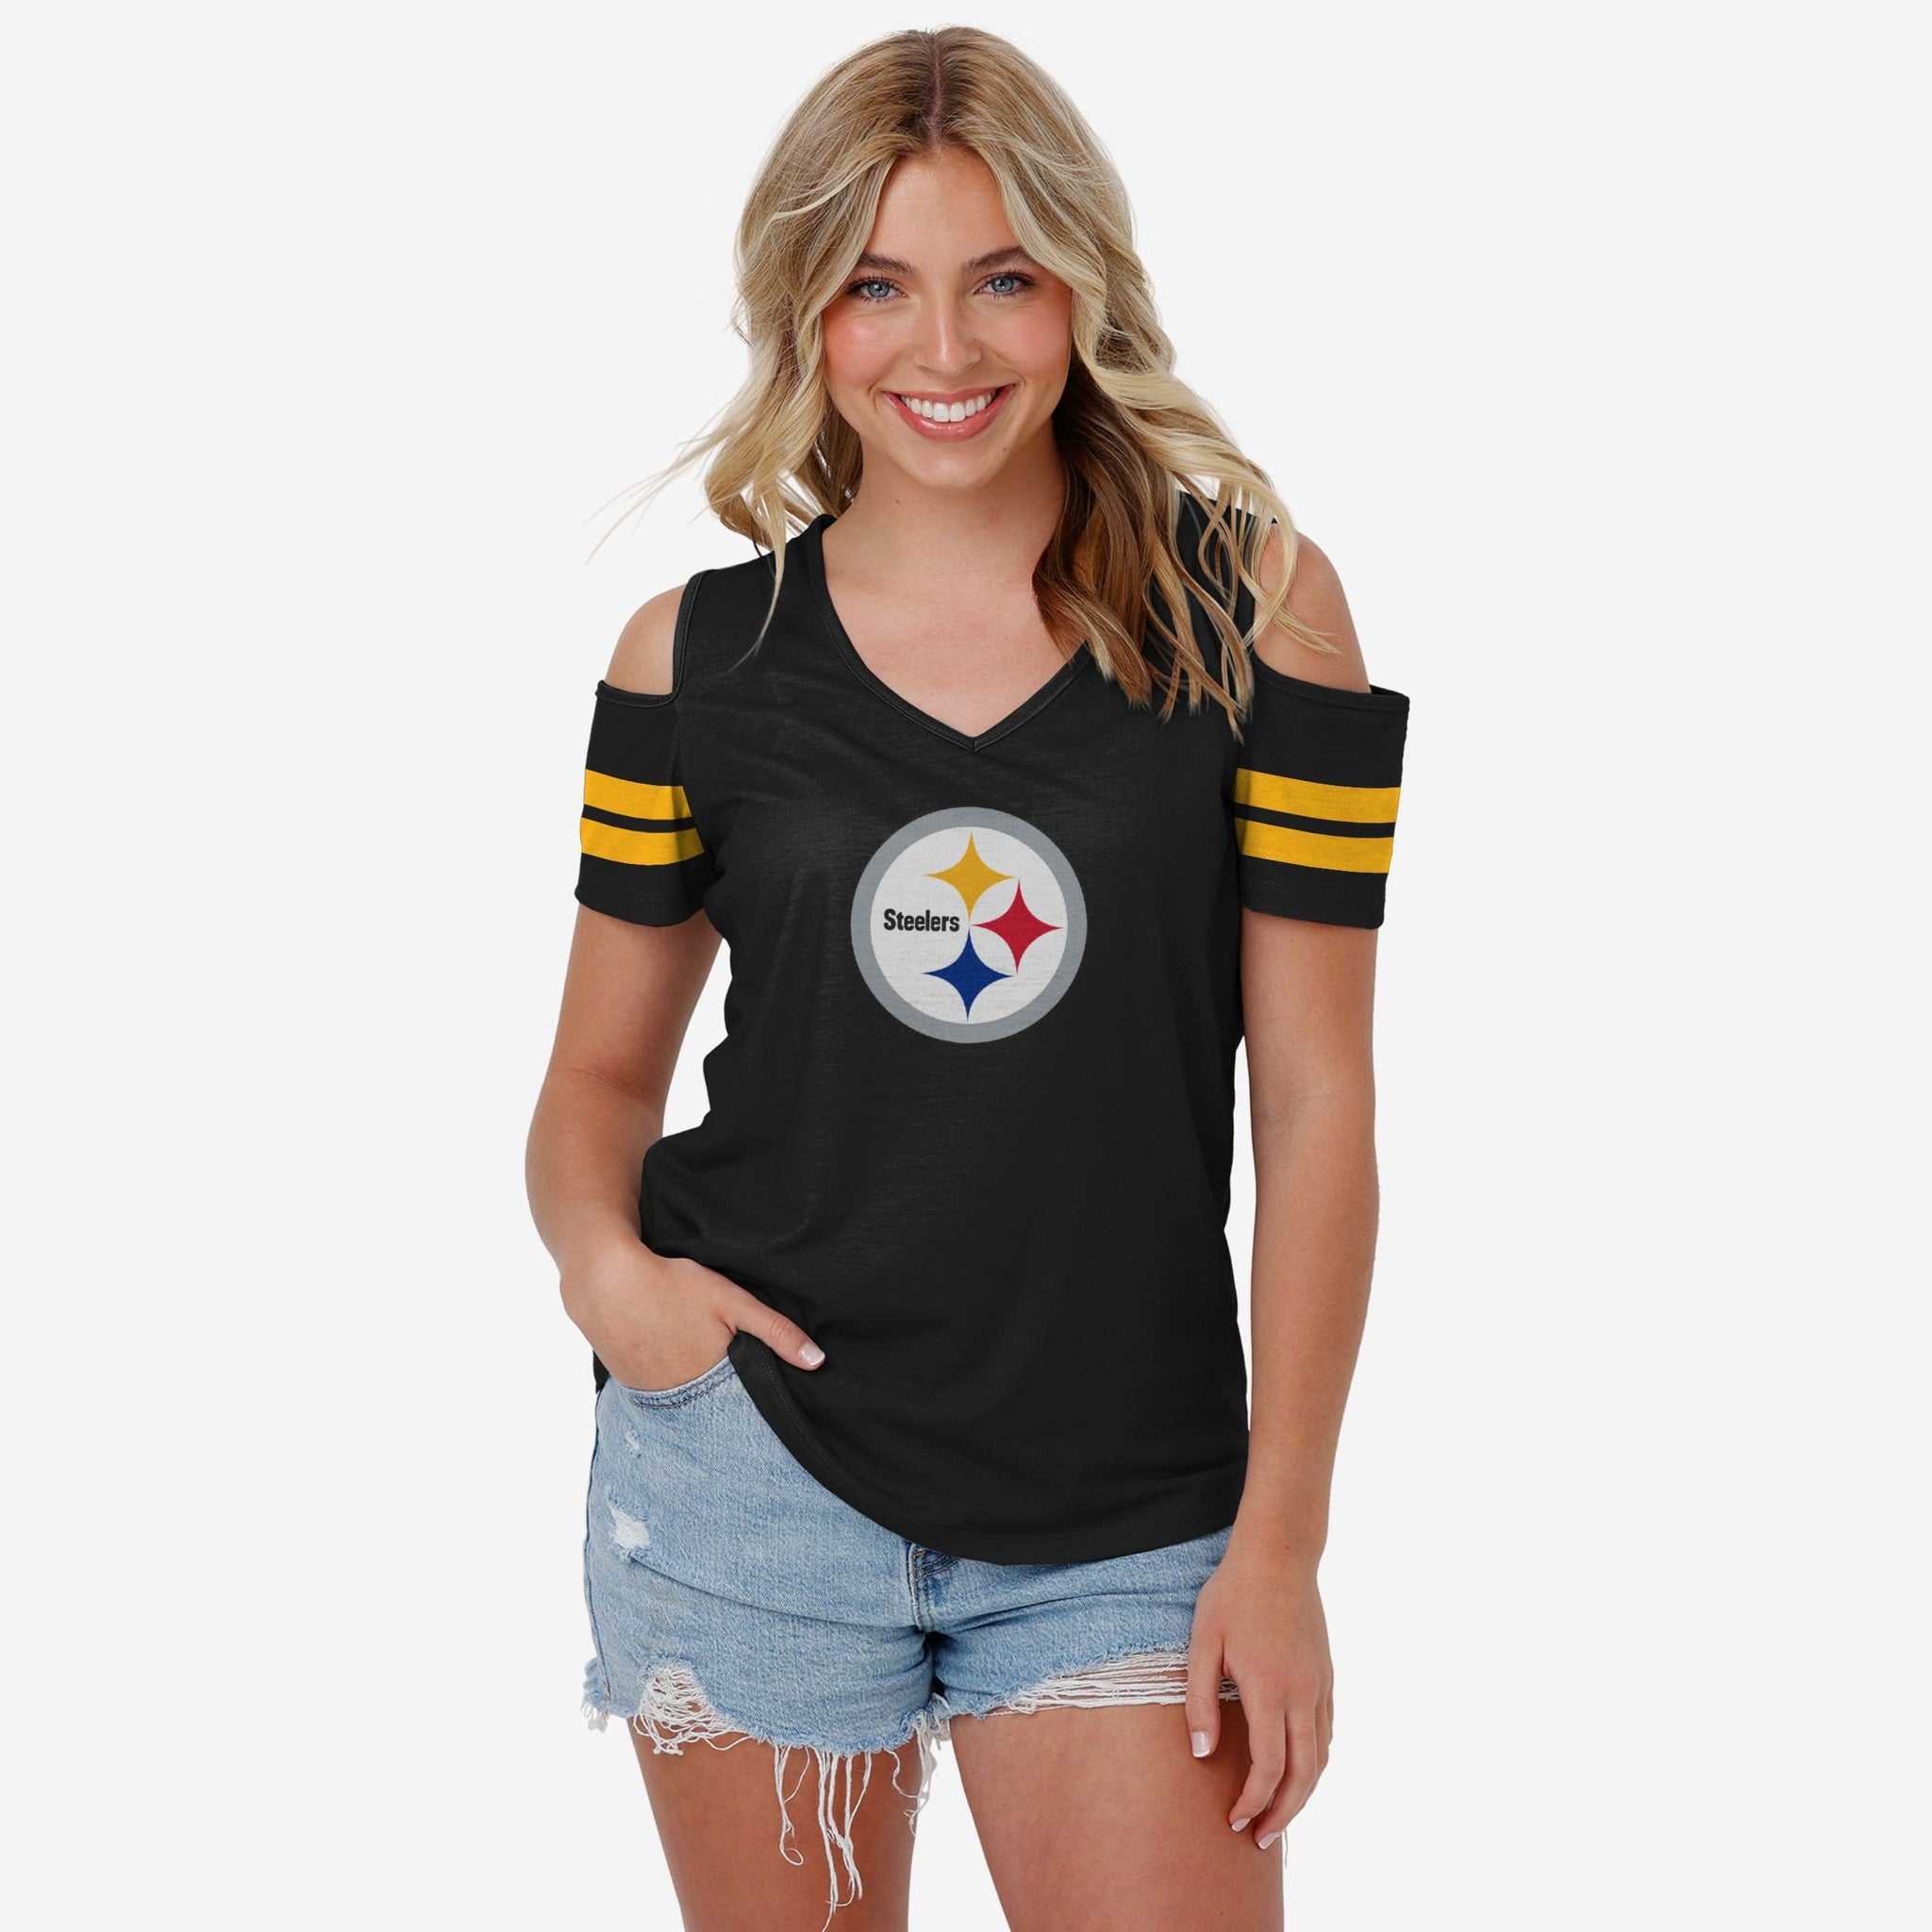 Check Out the Latest Steelers' Gear From FOCO!